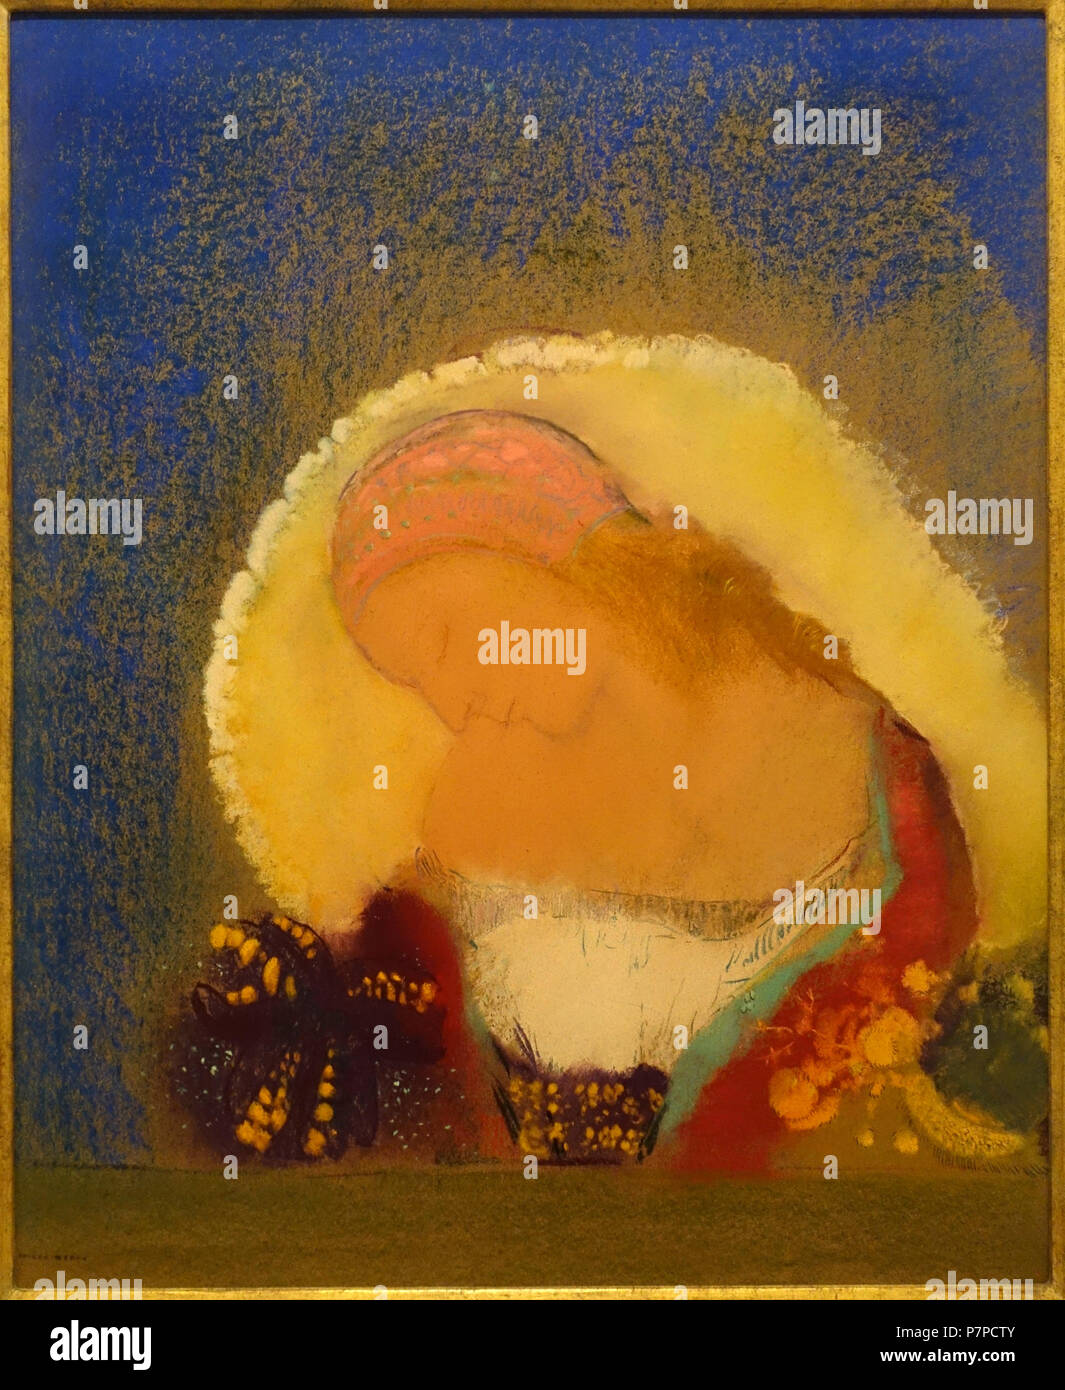 English: Exhibit in the Scharf-Gerstenberg Collection, Berlin, Germany. This artwork is in the  because its creator died more than 70 years ago. 15 November 2014, 08:23:31 203 Illuminated Flower by Odilon Redon, c. 1900, pastel - Scharf-Gerstenberg Collection - DSC03868 Stock Photo